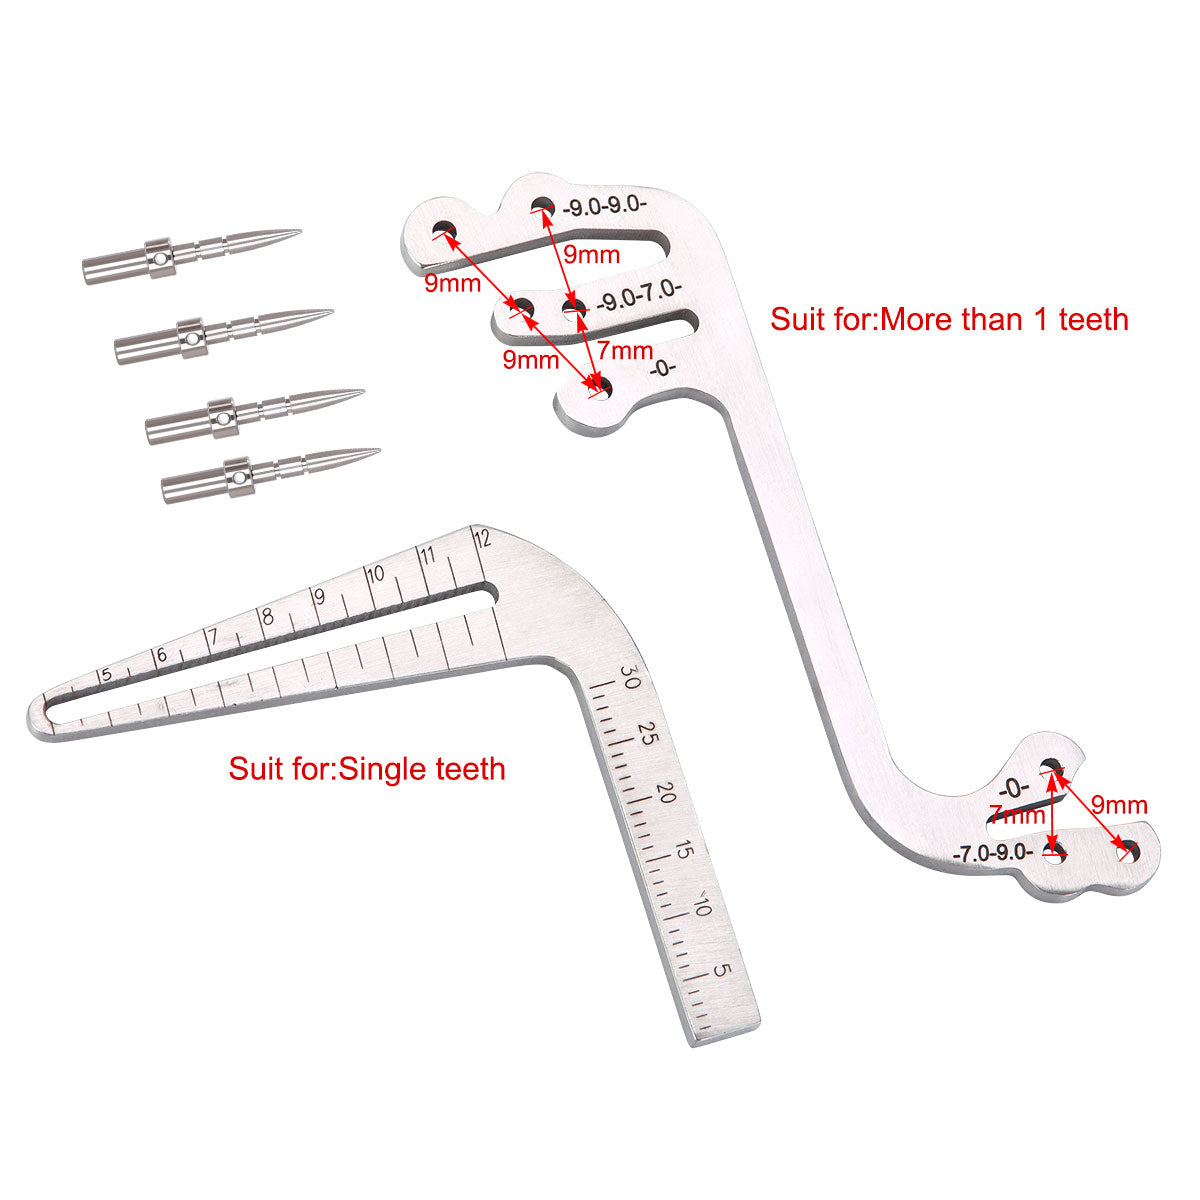 Dental Implant Surgical Drill Guide Locator Tooth Measuring Ruler Calipers Bone Ridge